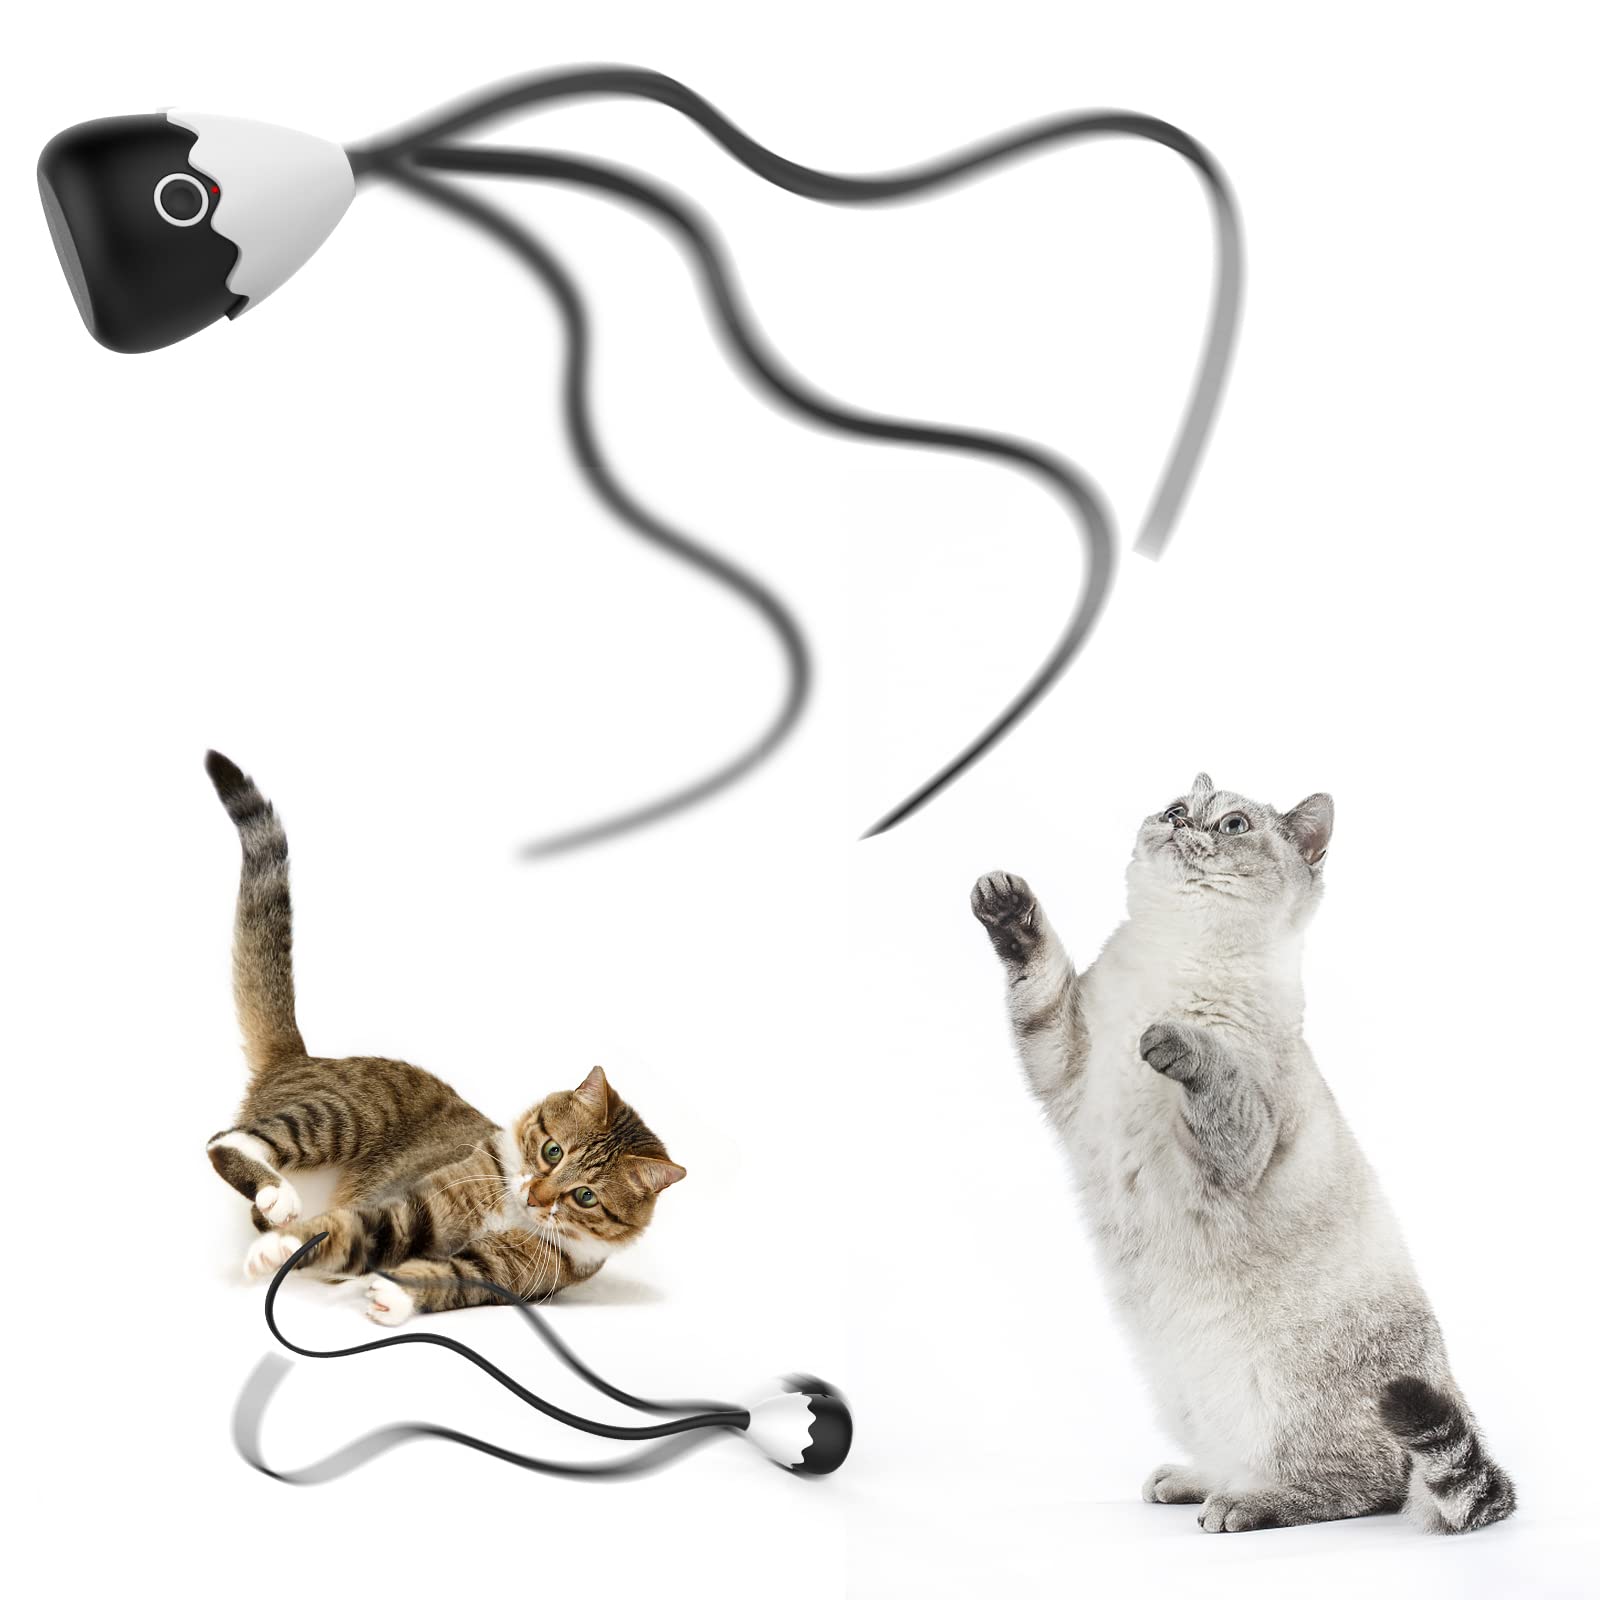 APSUAE Retractable Cat Wand Toy for Indoor Cats India